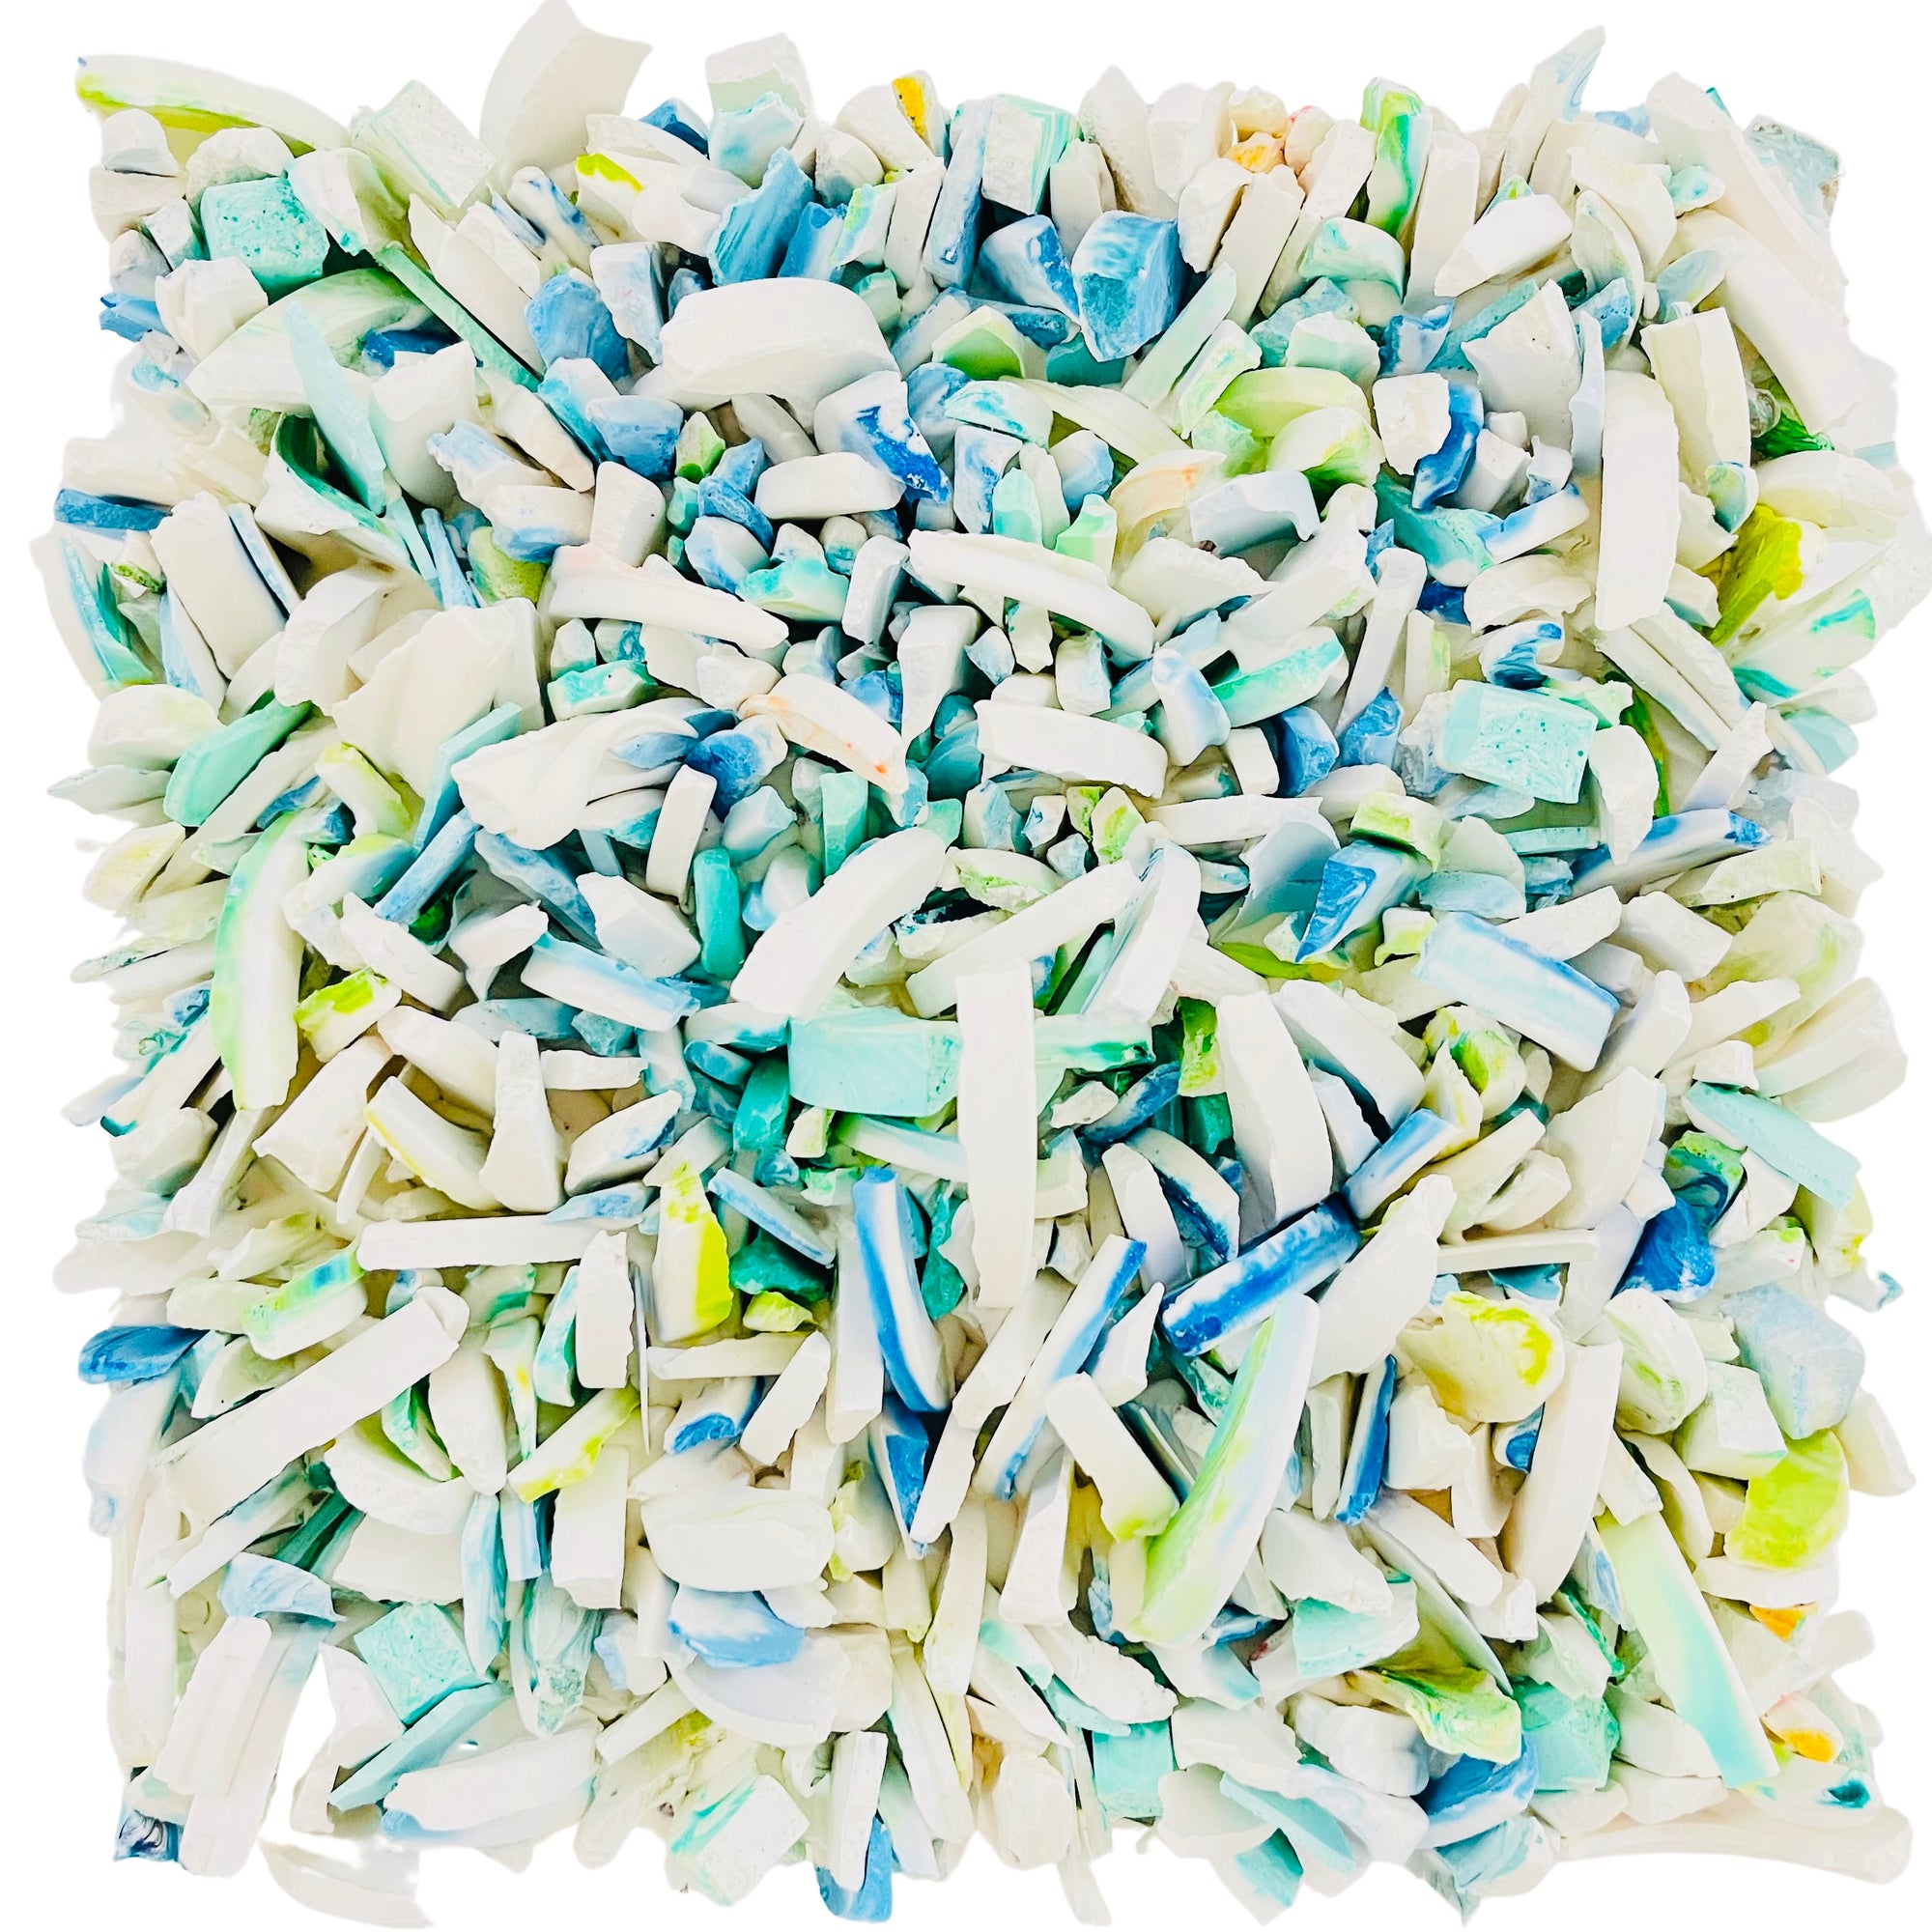 A textural abstract painting made from shards of turquoise Jesmonite measuring 20cm x 20cm.